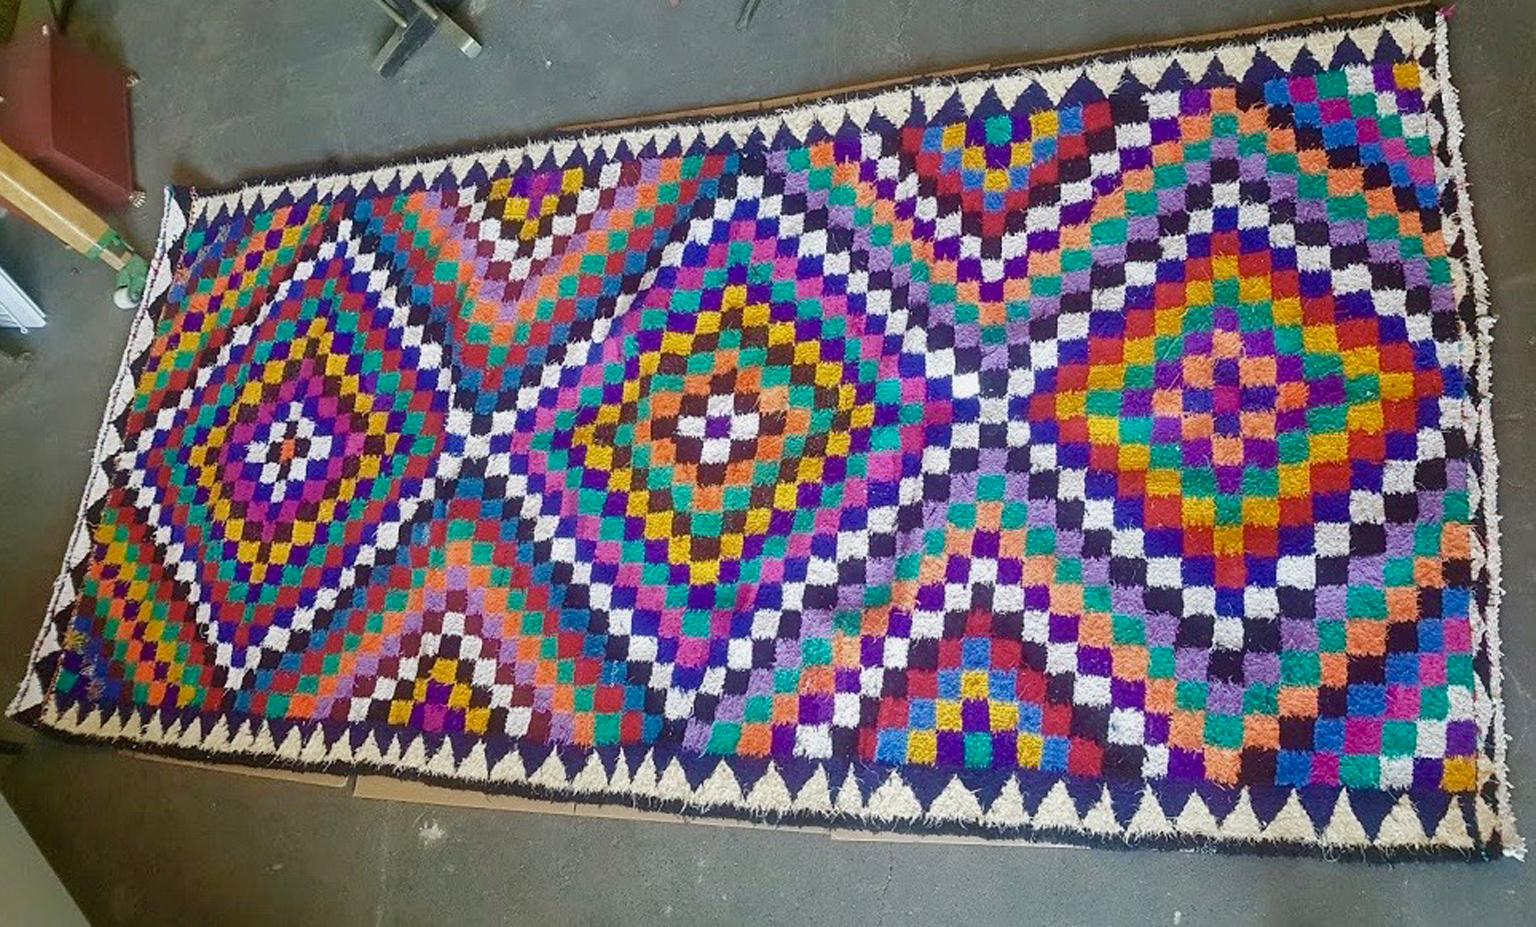 This rug is from the 1970s and is in a clean and good condition. His format is perfect for putting it under a dining table.